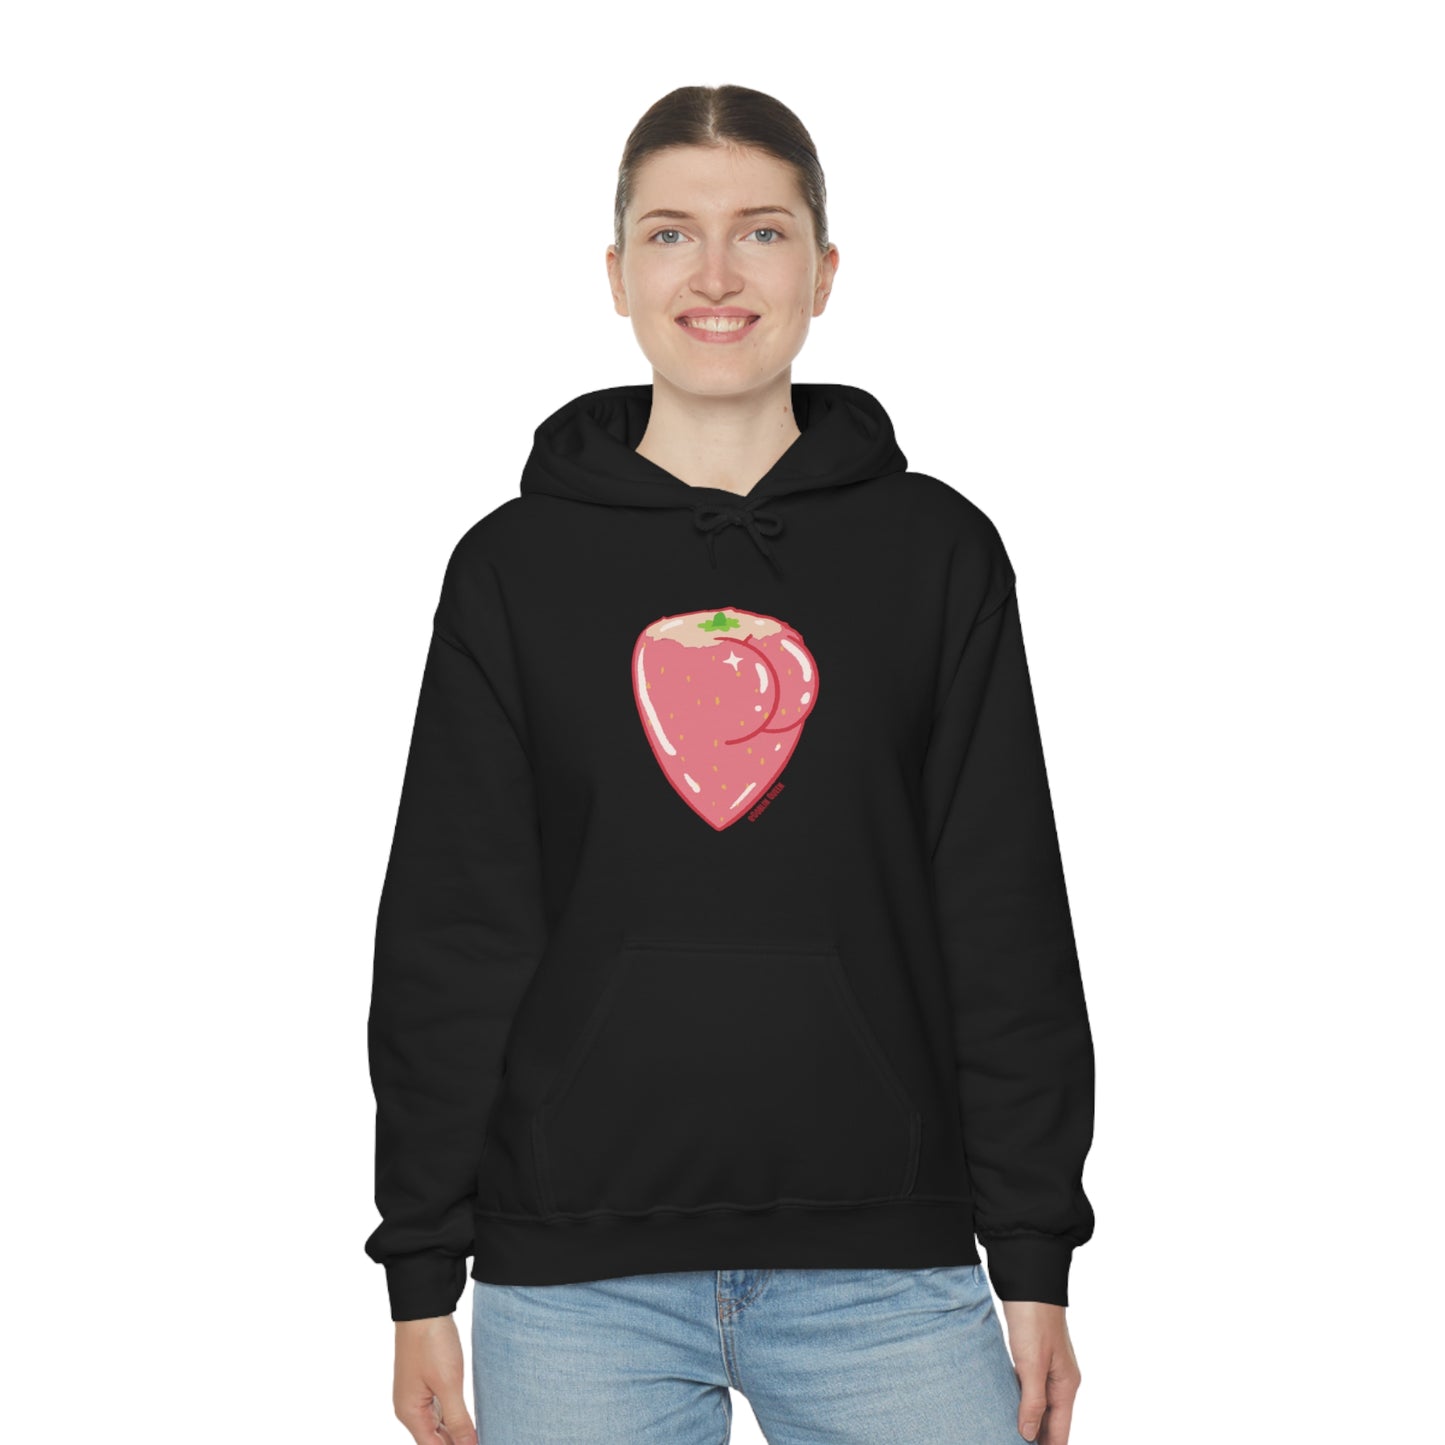 Jody King, Strawberry Thicc Cakes Hoodie